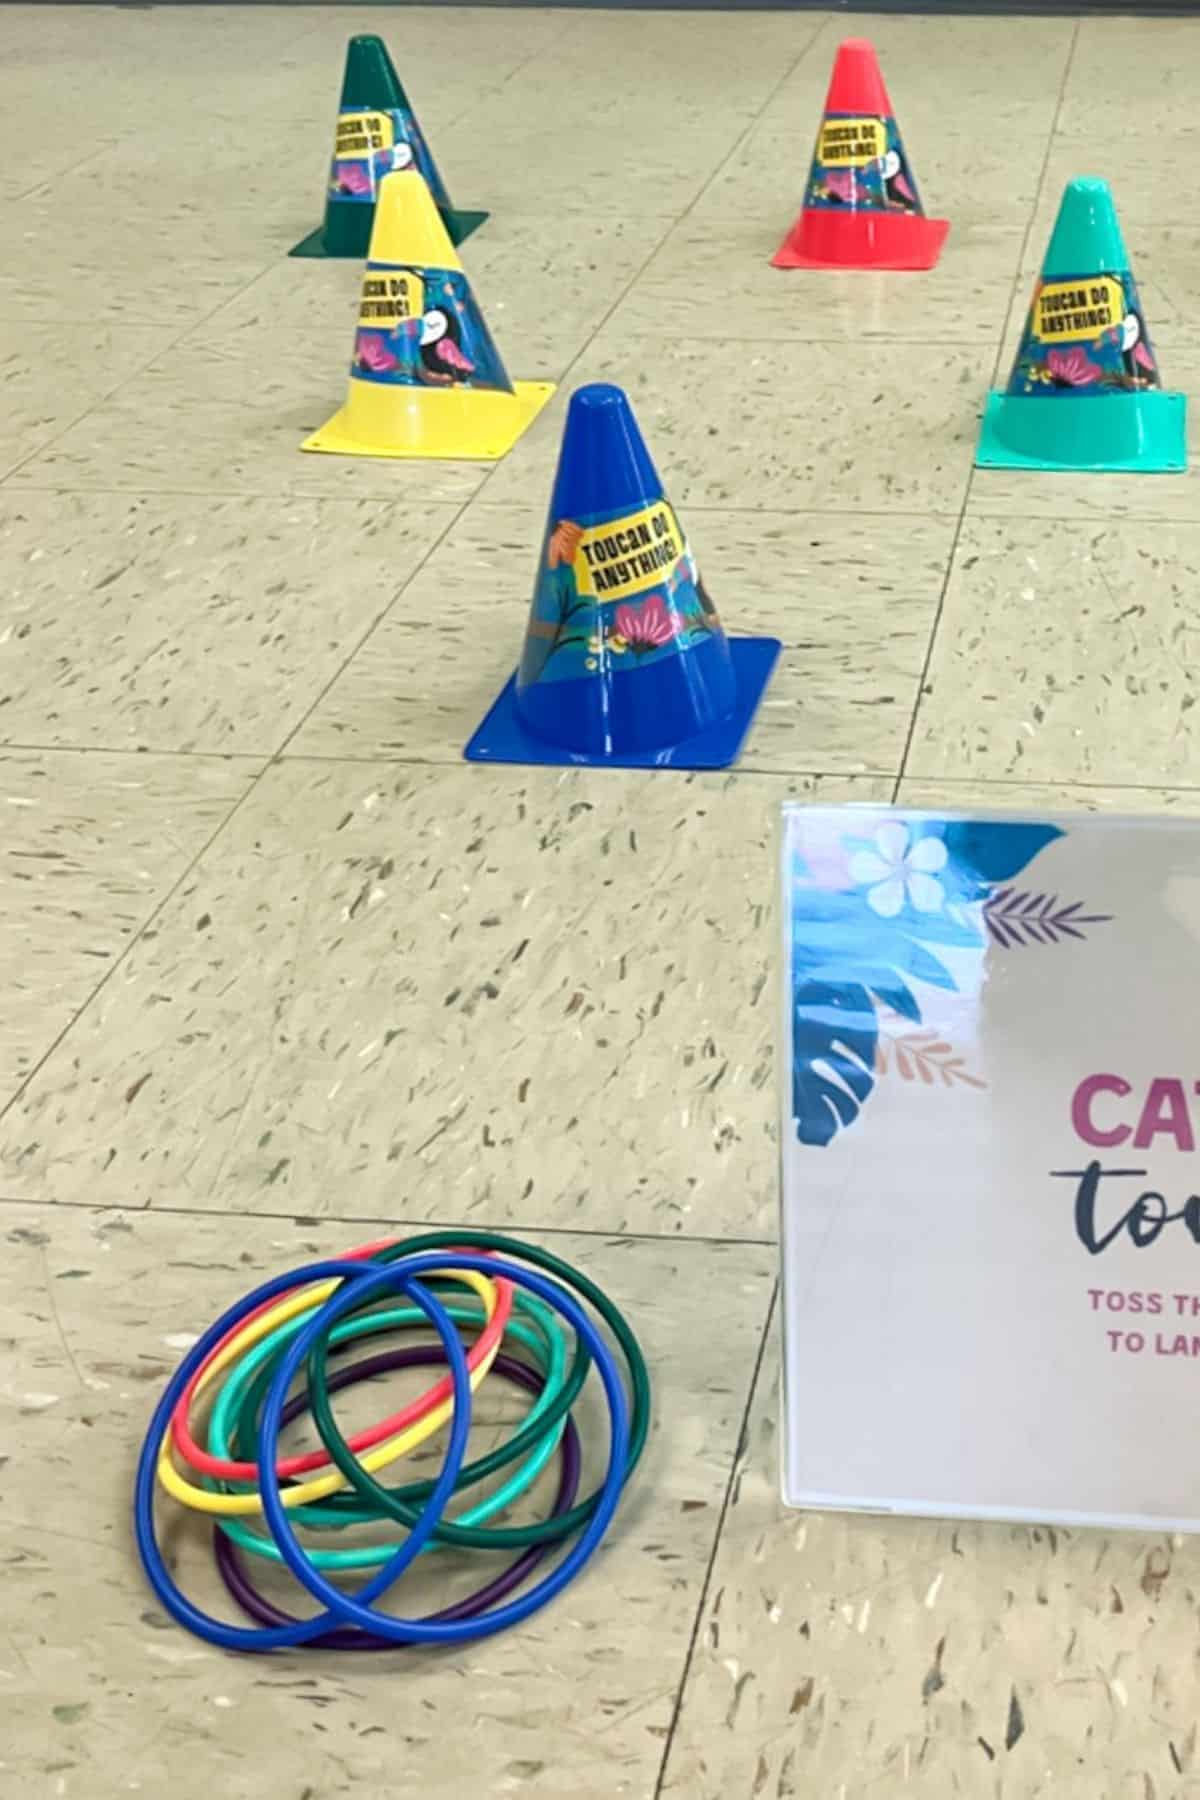 Ring toss modified into catch the toucan for a birthday party.